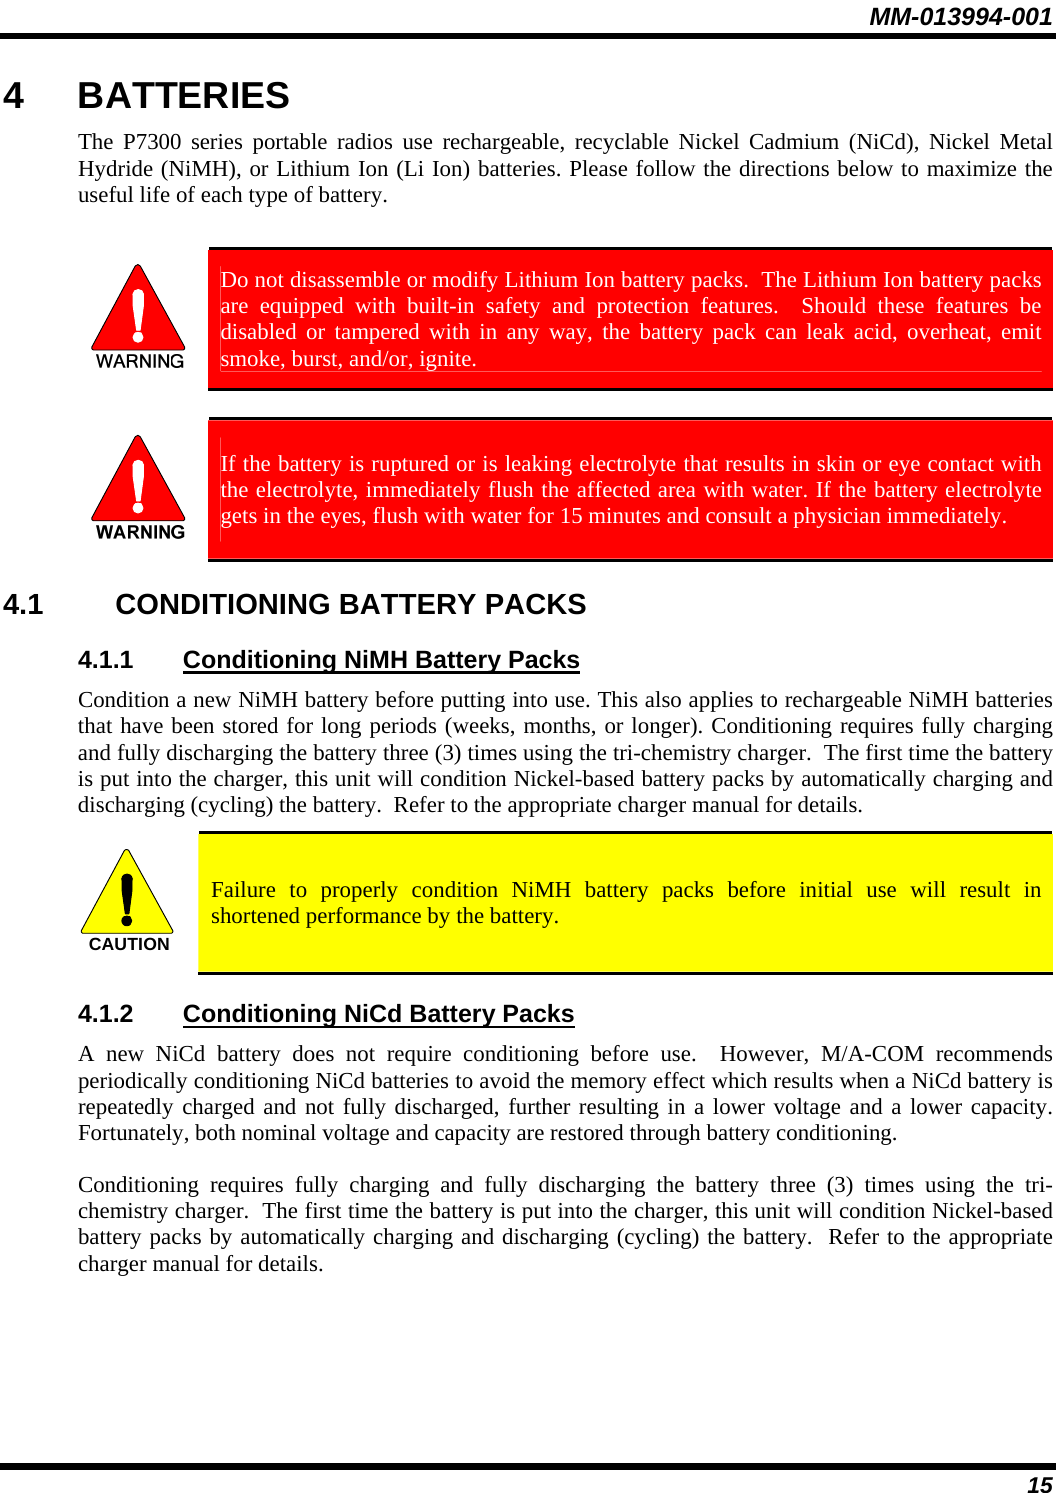 MM-013994-001 15 4 BATTERIES The P7300 series portable radios use rechargeable, recyclable Nickel Cadmium (NiCd), Nickel Metal Hydride (NiMH), or Lithium Ion (Li Ion) batteries. Please follow the directions below to maximize the useful life of each type of battery.   Do not disassemble or modify Lithium Ion battery packs.  The Lithium Ion battery packs are equipped with built-in safety and protection features.  Should these features be disabled or tampered with in any way, the battery pack can leak acid, overheat, emit smoke, burst, and/or, ignite.   If the battery is ruptured or is leaking electrolyte that results in skin or eye contact with the electrolyte, immediately flush the affected area with water. If the battery electrolyte gets in the eyes, flush with water for 15 minutes and consult a physician immediately. 4.1 CONDITIONING BATTERY PACKS 4.1.1  Conditioning NiMH Battery Packs Condition a new NiMH battery before putting into use. This also applies to rechargeable NiMH batteries that have been stored for long periods (weeks, months, or longer). Conditioning requires fully charging and fully discharging the battery three (3) times using the tri-chemistry charger.  The first time the battery is put into the charger, this unit will condition Nickel-based battery packs by automatically charging and discharging (cycling) the battery.  Refer to the appropriate charger manual for details. CAUTION  Failure to properly condition NiMH battery packs before initial use will result in shortened performance by the battery. 4.1.2  Conditioning NiCd Battery Packs A new NiCd battery does not require conditioning before use.  However, M/A-COM recommends periodically conditioning NiCd batteries to avoid the memory effect which results when a NiCd battery is repeatedly charged and not fully discharged, further resulting in a lower voltage and a lower capacity. Fortunately, both nominal voltage and capacity are restored through battery conditioning.   Conditioning requires fully charging and fully discharging the battery three (3) times using the tri-chemistry charger.  The first time the battery is put into the charger, this unit will condition Nickel-based battery packs by automatically charging and discharging (cycling) the battery.  Refer to the appropriate charger manual for details.  